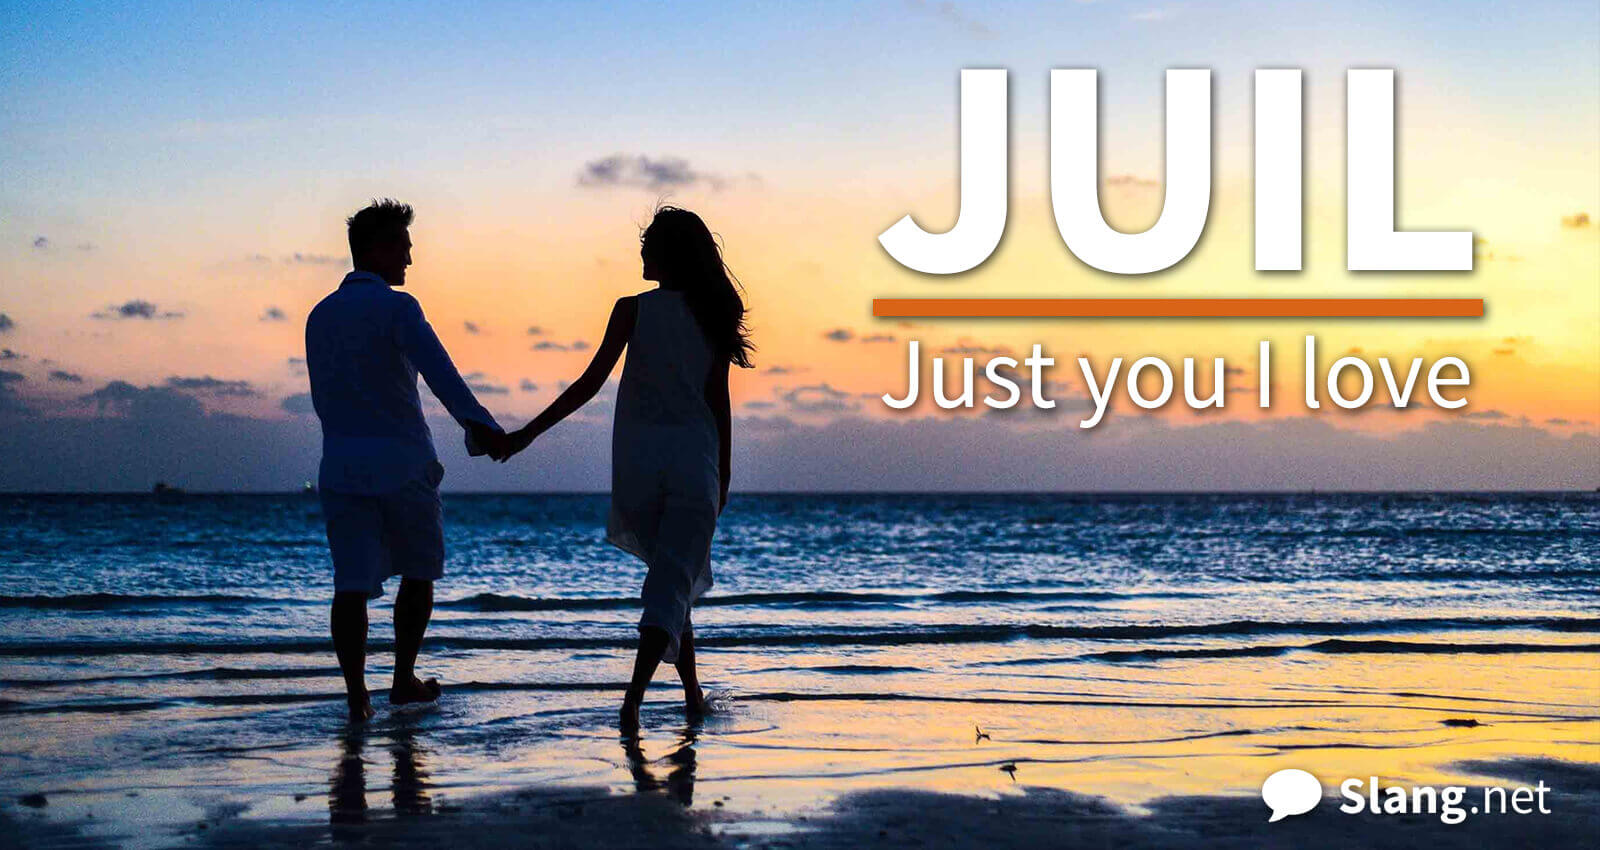 JUIL is a romantic acronym that may make the recipient swoon